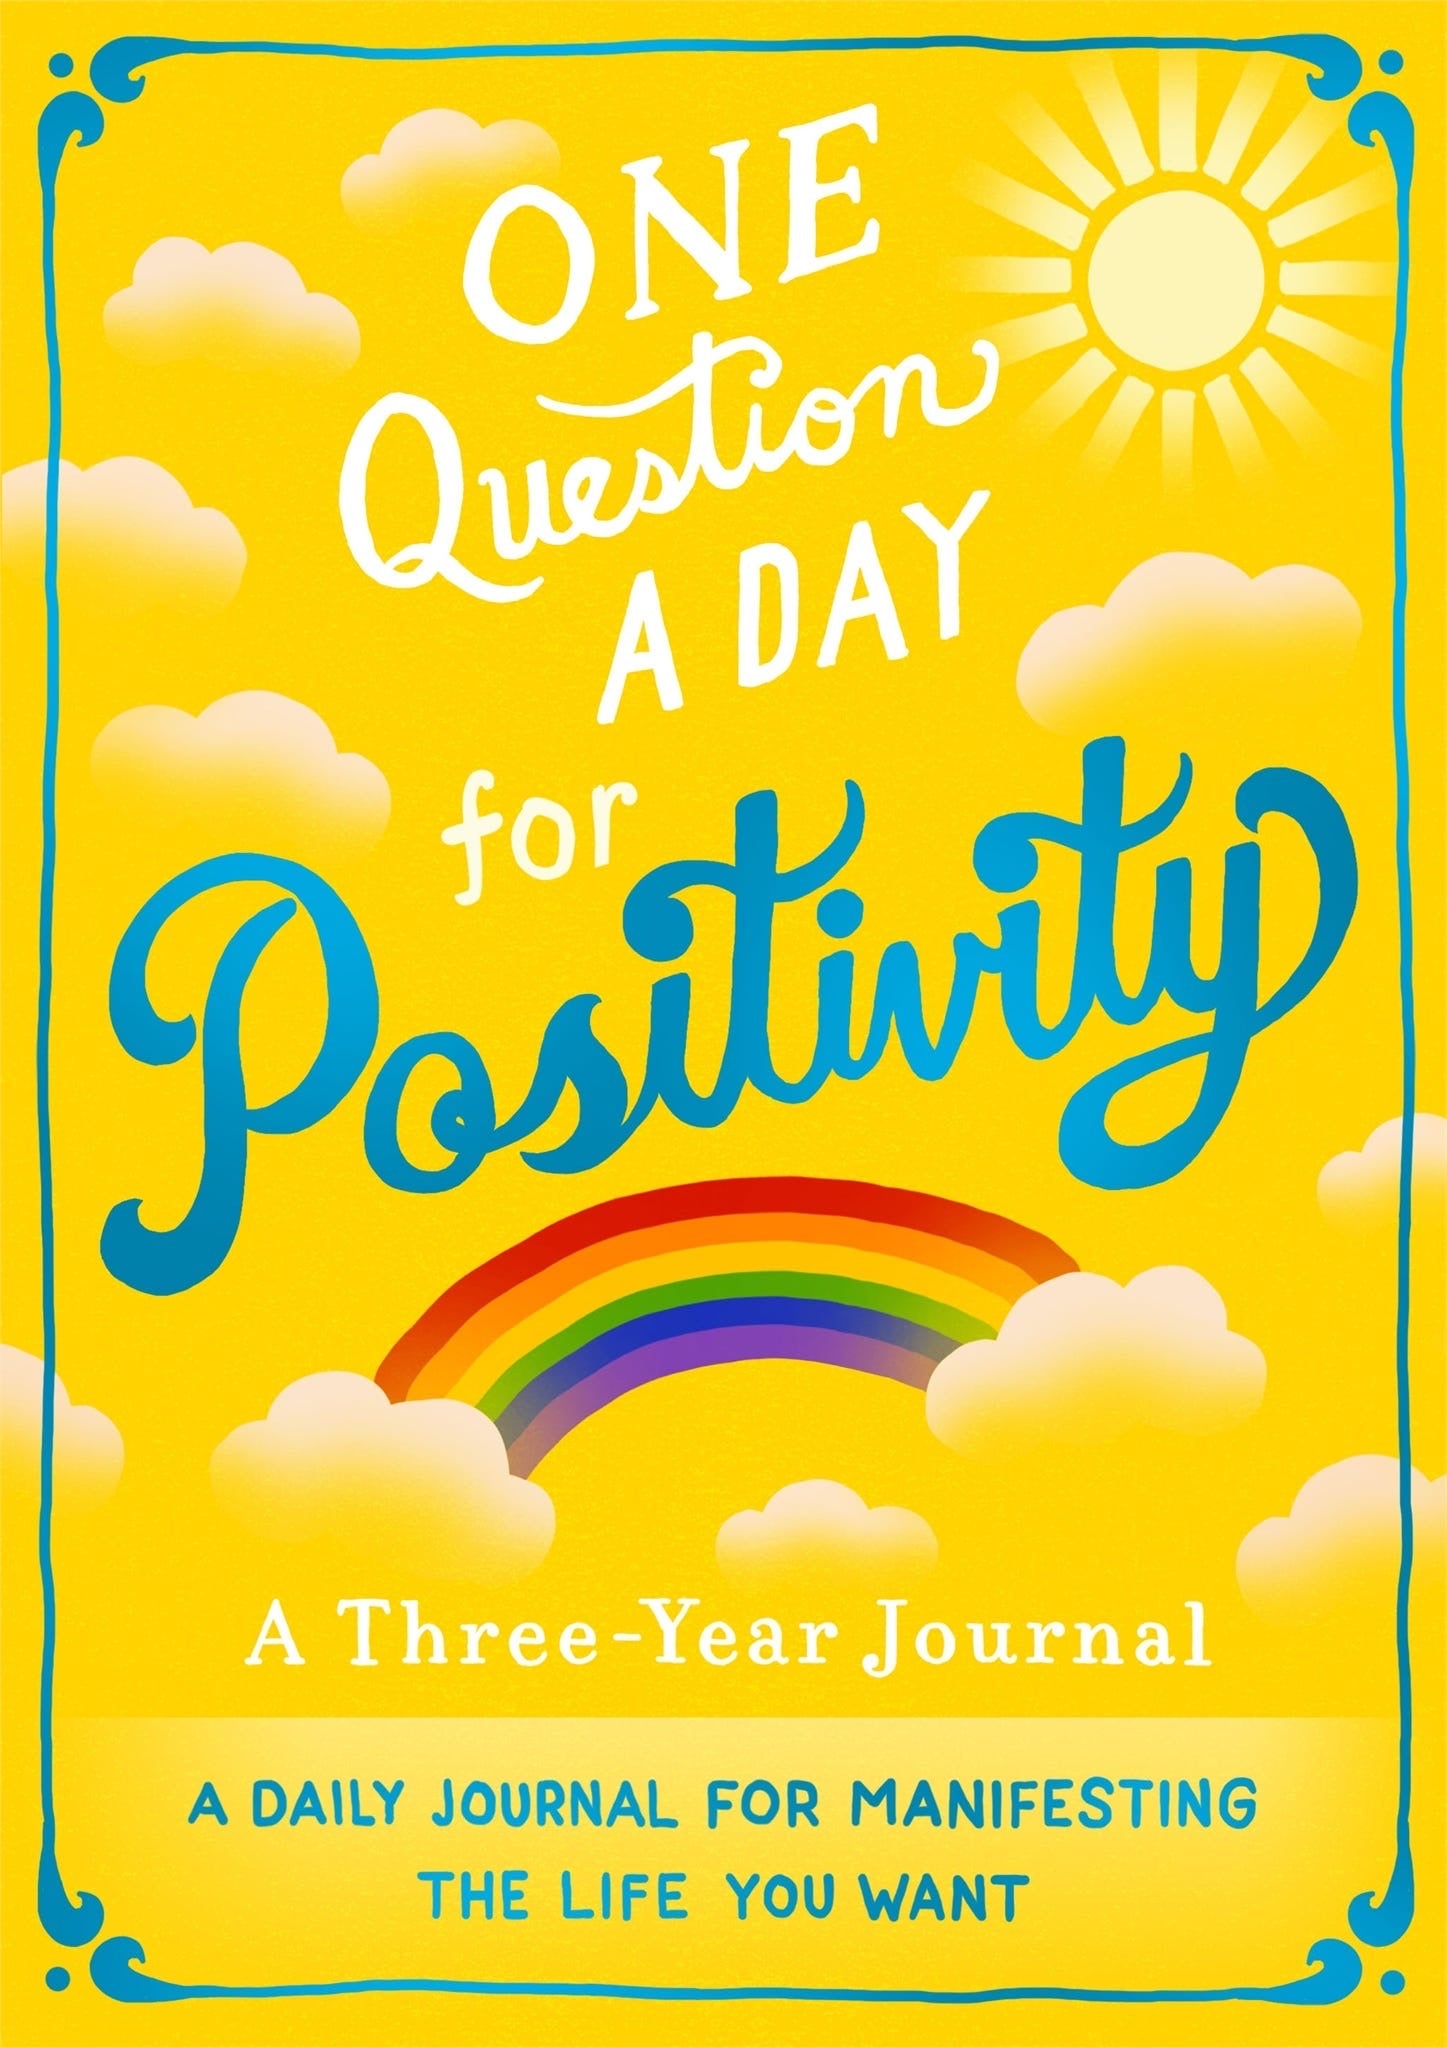 One Question a Day for Positivity: A Three-Year Journal: A Daily Journal for Manifesting the Life You Want